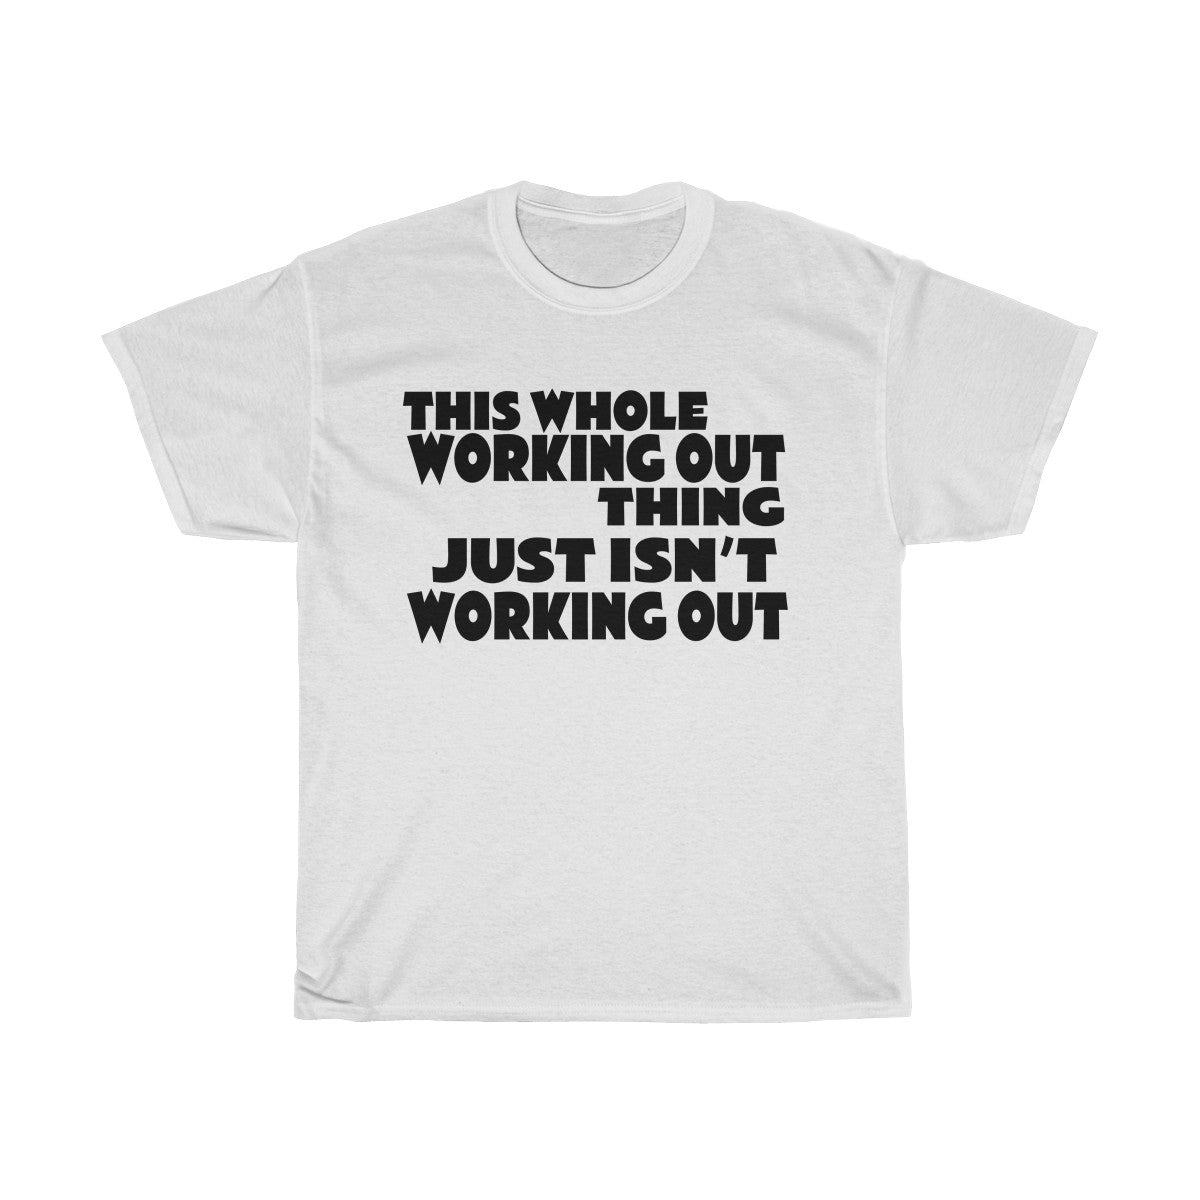 This Working Out Thing Isn't Working Out Funny T-Shirt